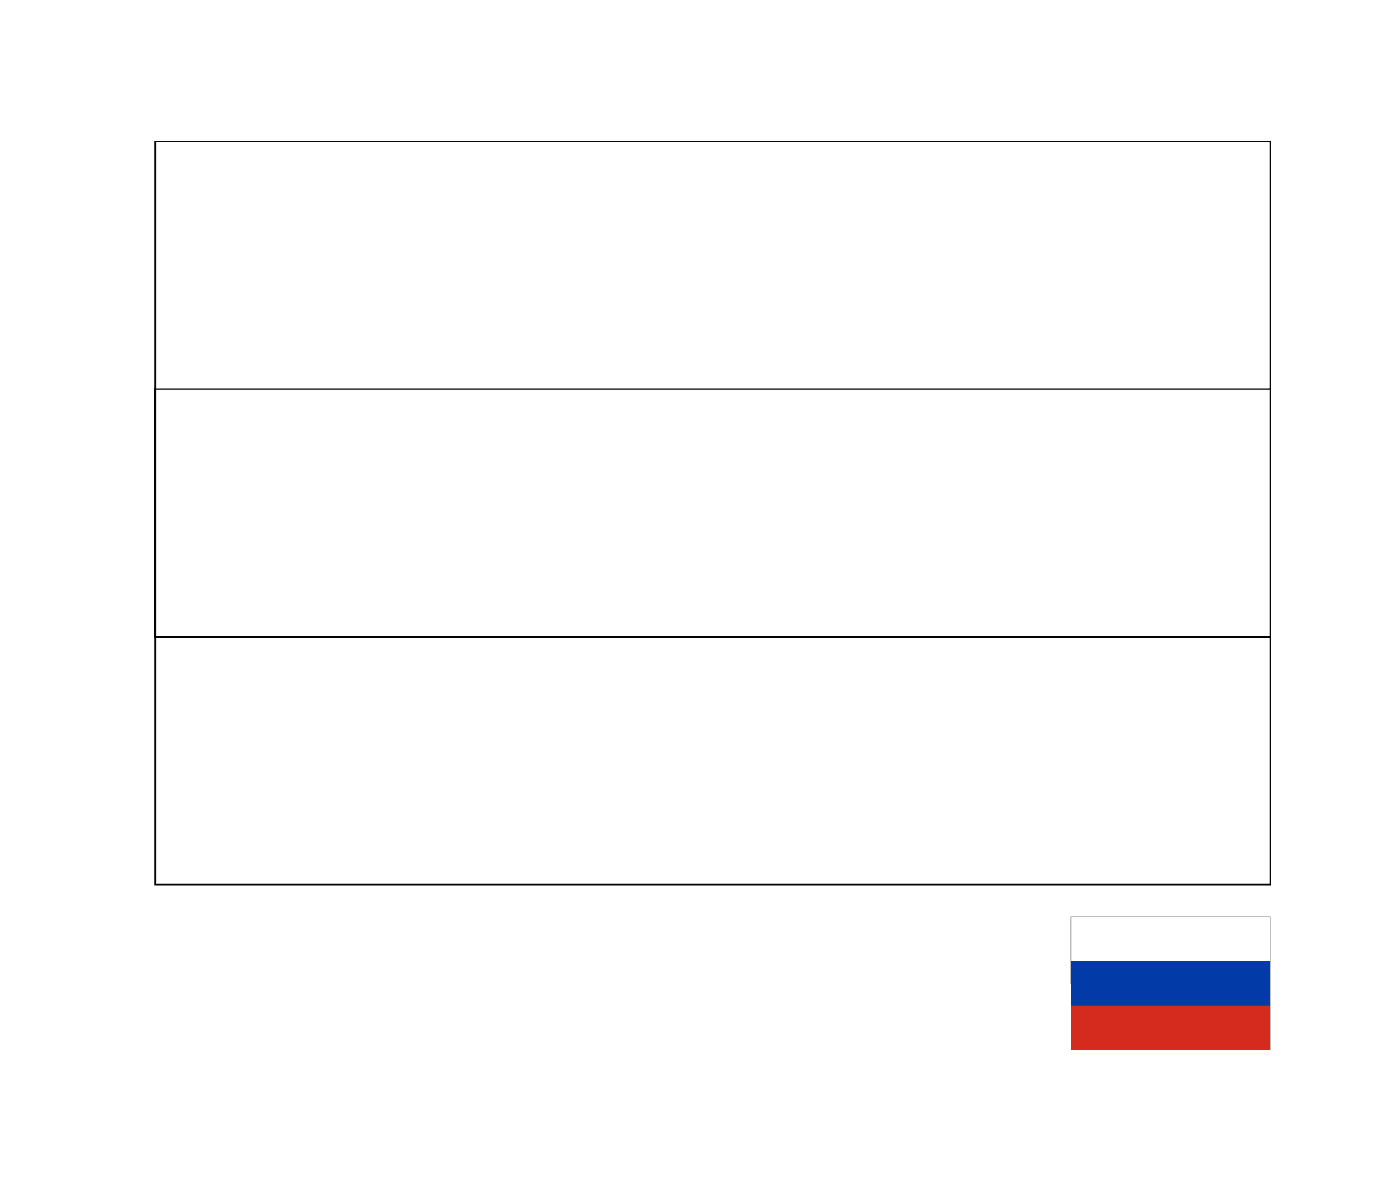  A flag of Russia 